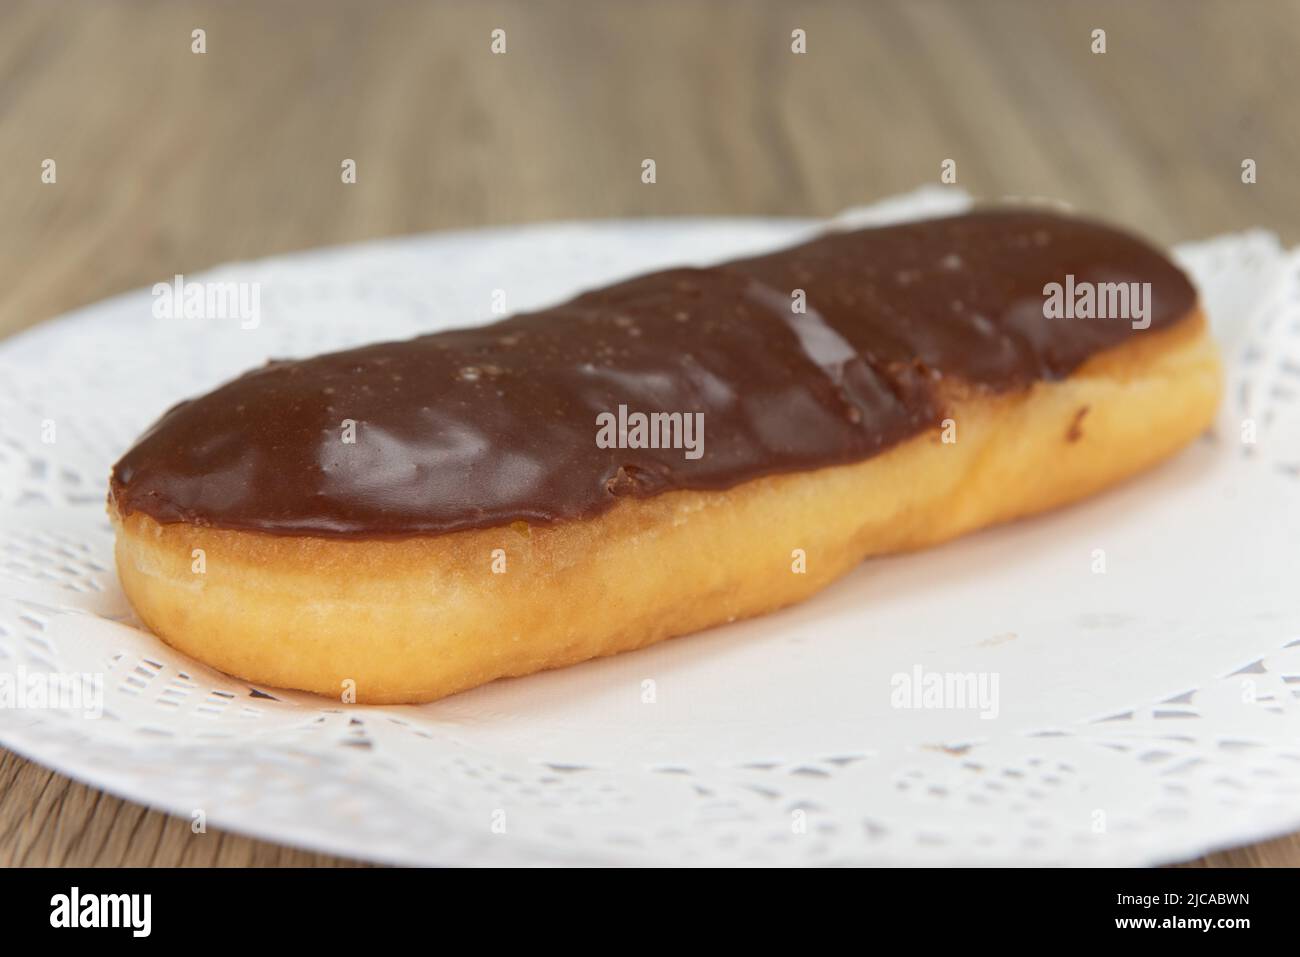 Tempting fresh from the oven chocolate bar donut from the bakery served on a plate. Stock Photo